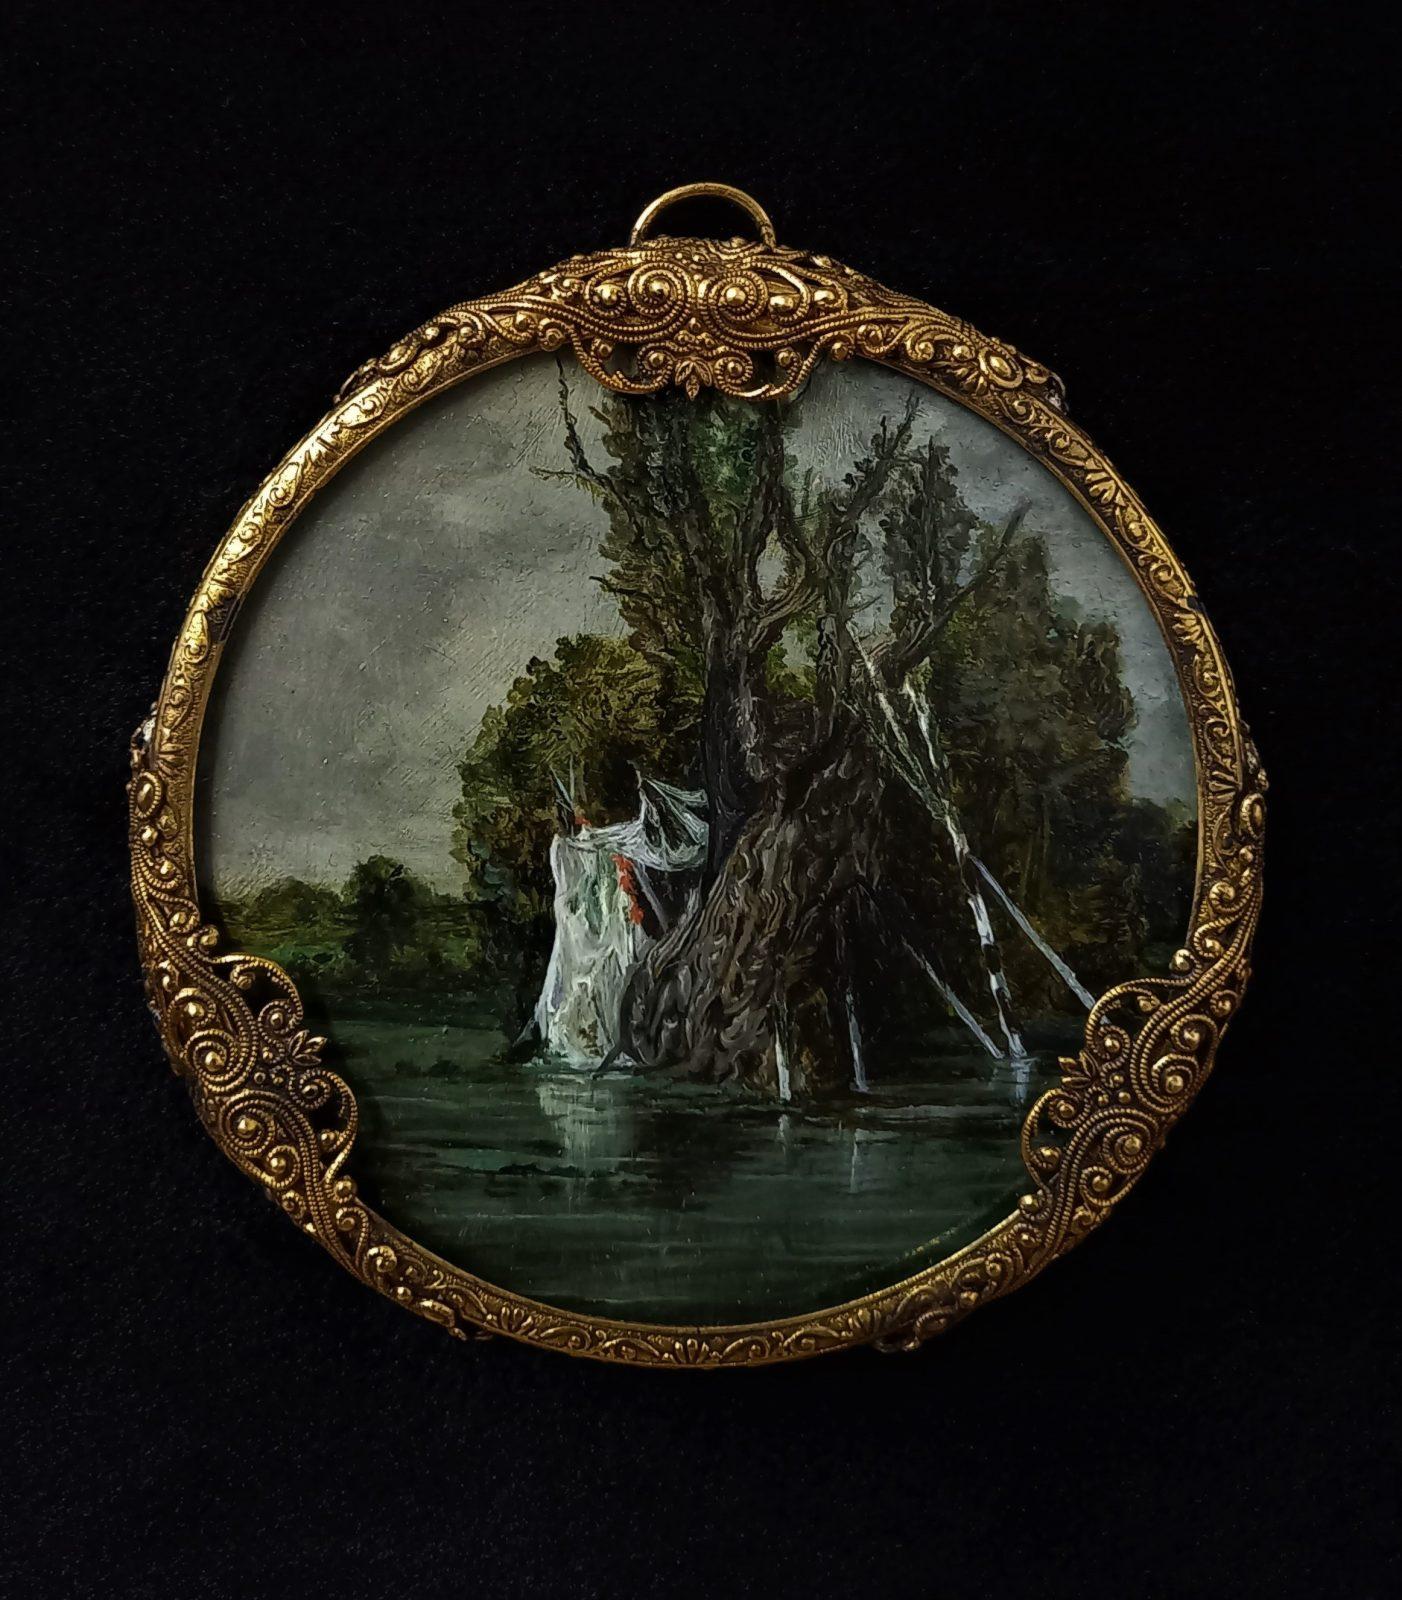 This miniature painting reflects the many depictions of the Hollow Tree through which one could pass. The ancient tree, though still alive, was supported with stays which were adorned during rituals or annual celebrations.